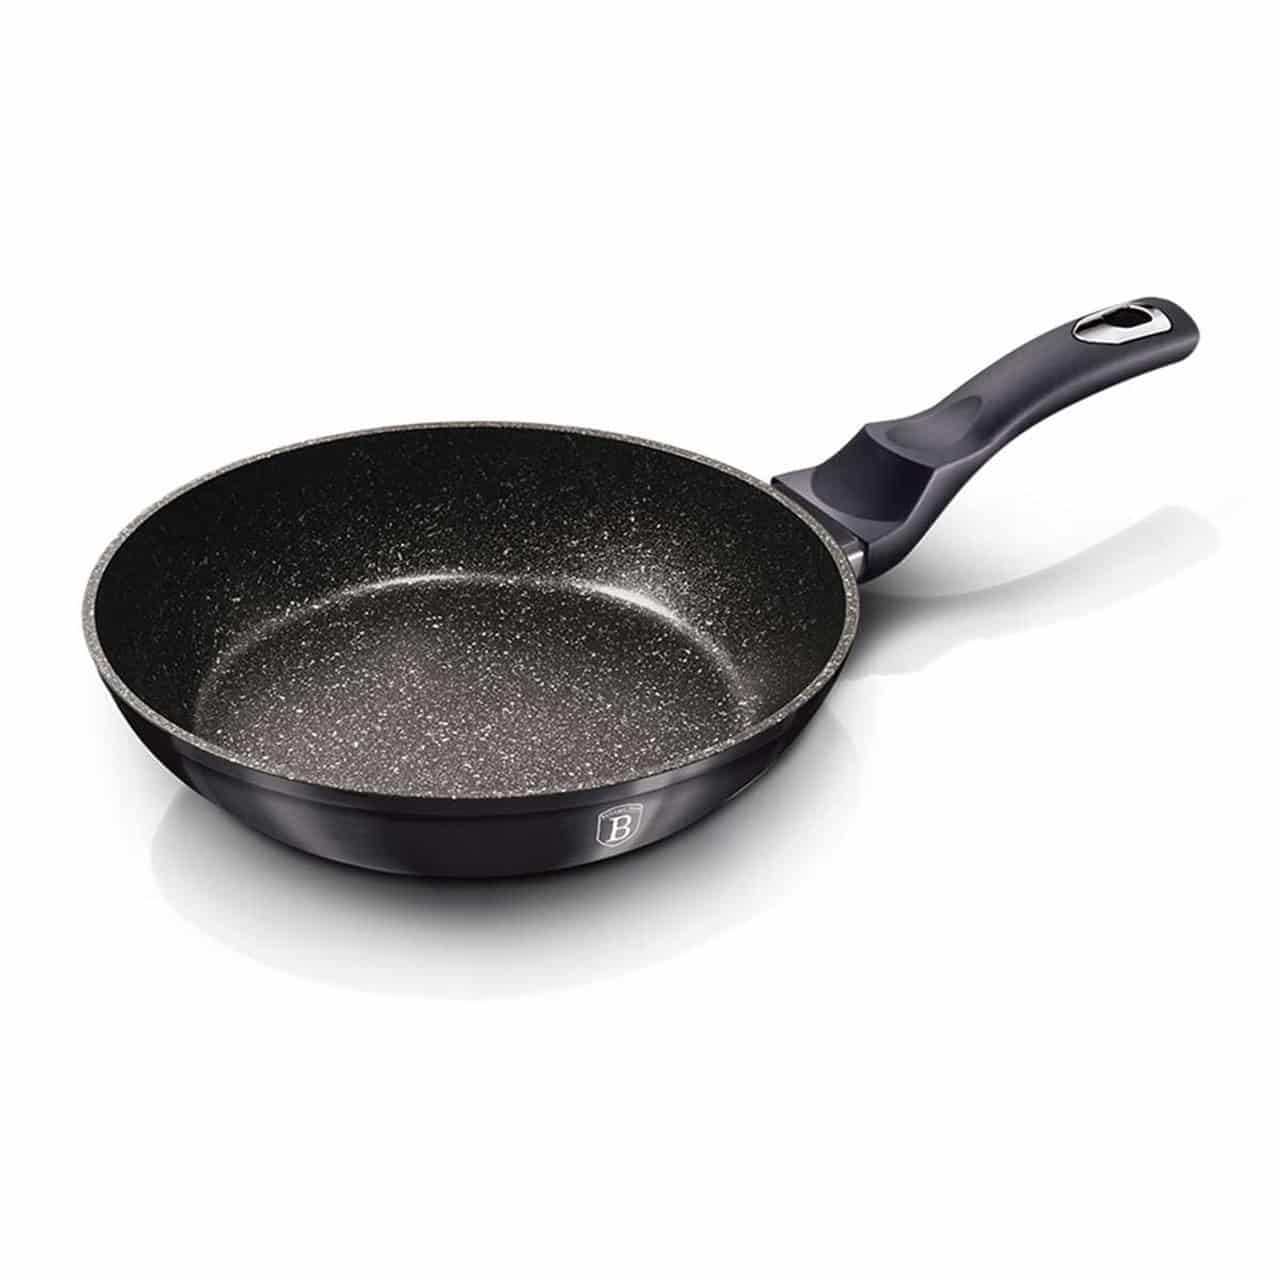 Berlinger Haus - 20cm Marble Coating Fry Pan - Carbon Pro Edition - BH-6888